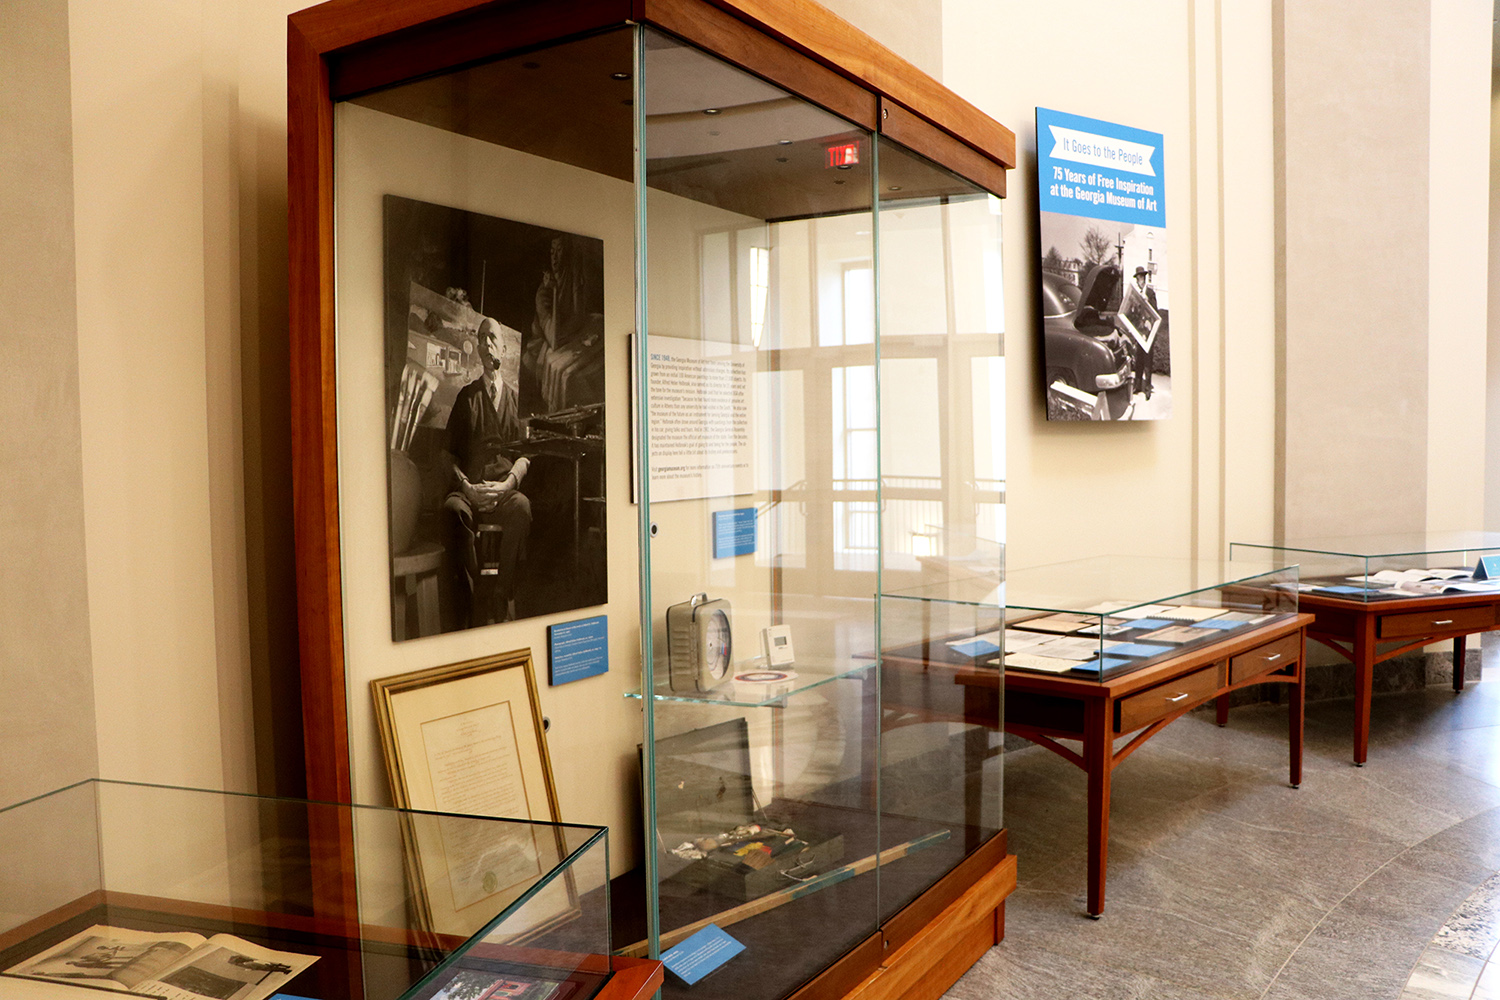 Display of documents, photographs and memorabilia from the founding of the Georgia Museum of Art